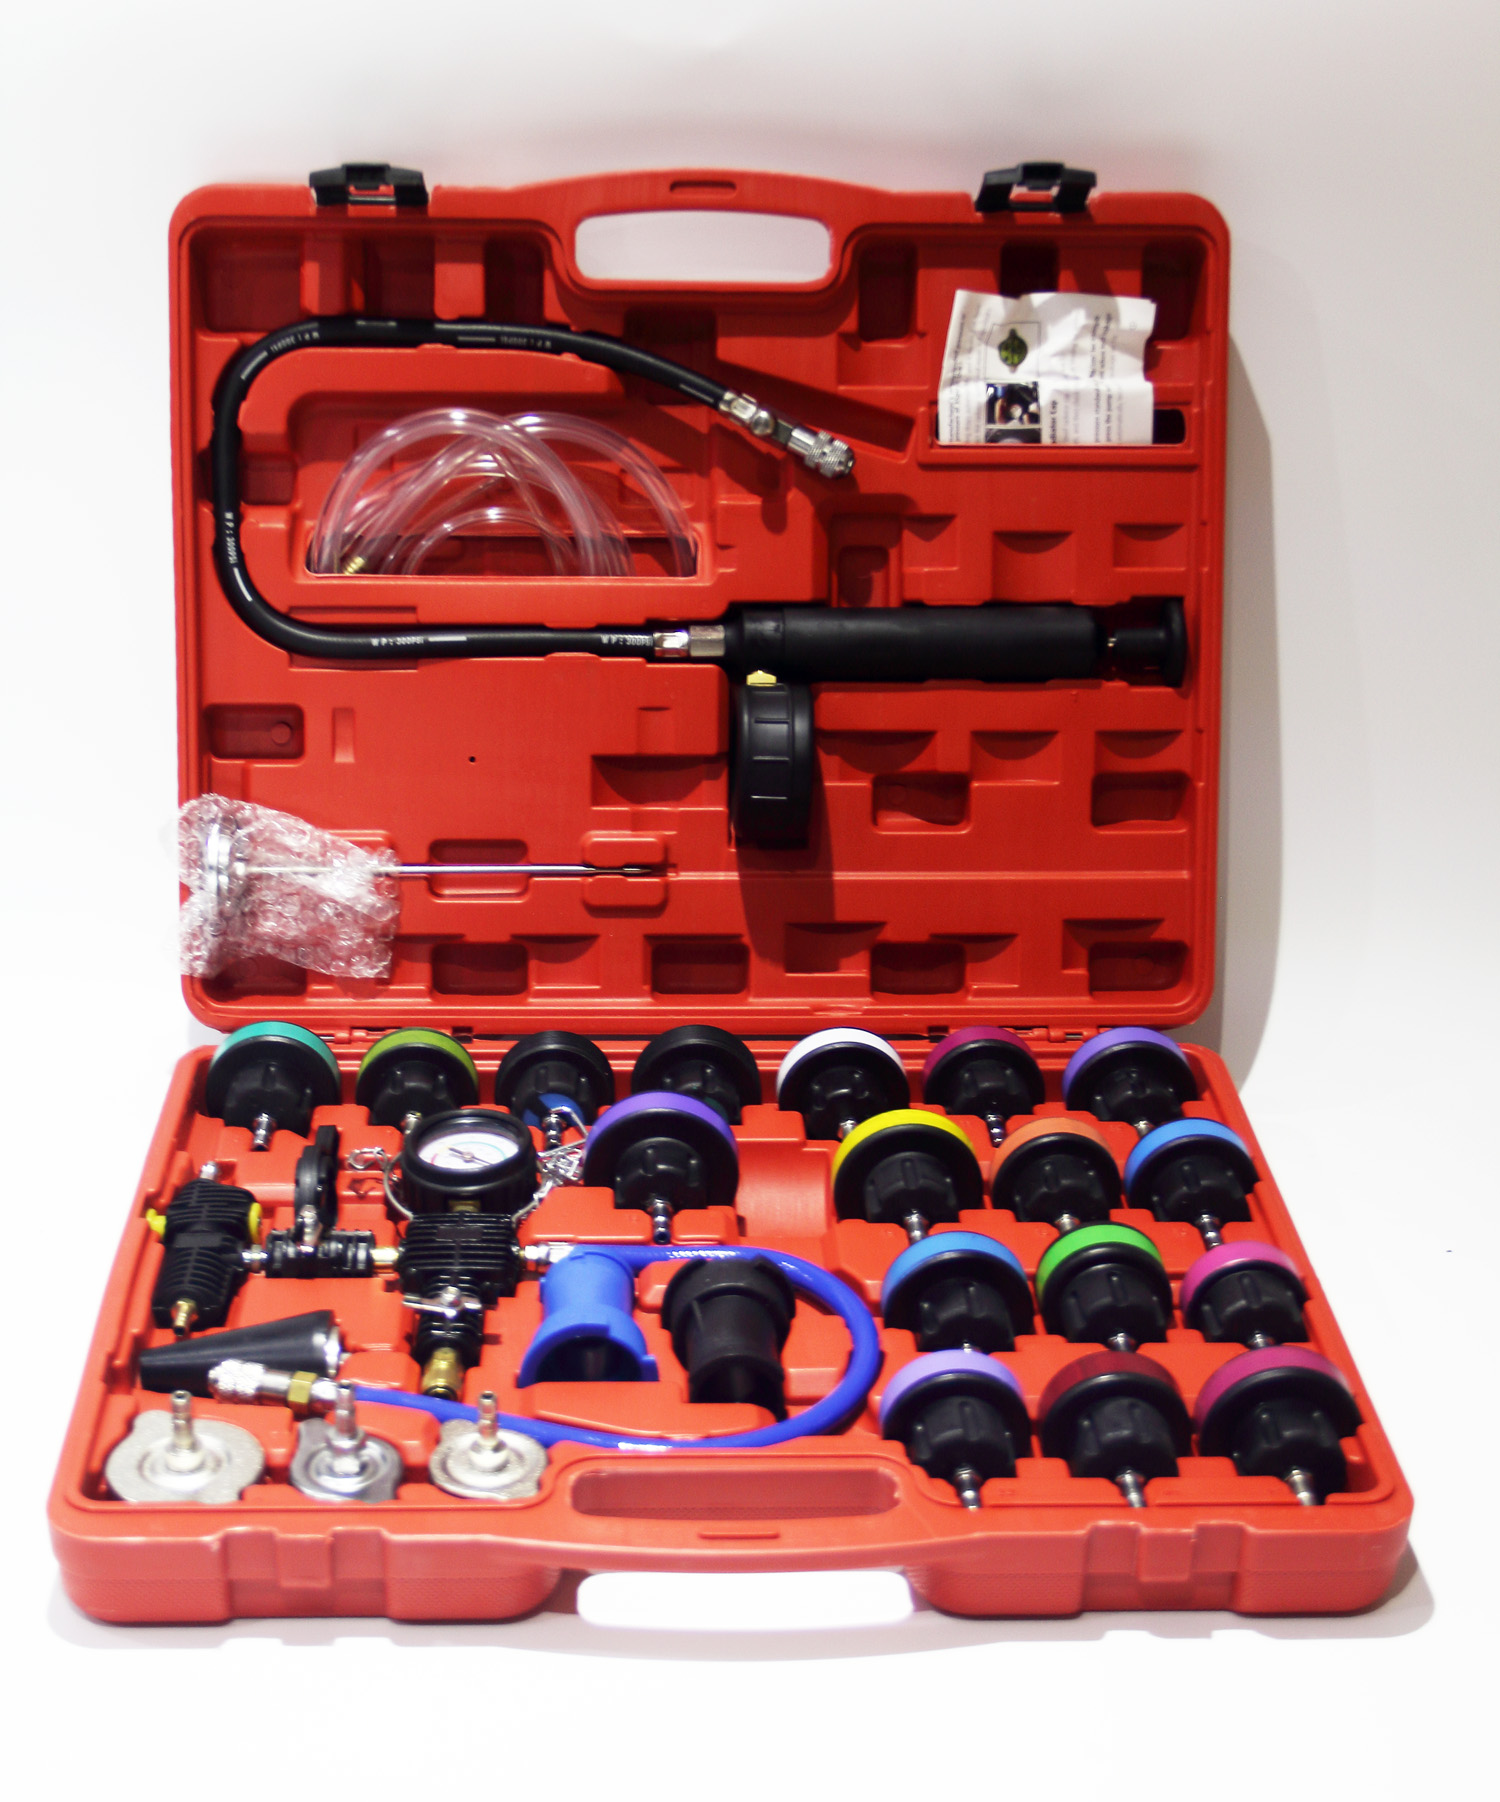 27pc Master Cooling Radiator Pressure Tester with Vacuum Purge and Refill Kit(Plastic)